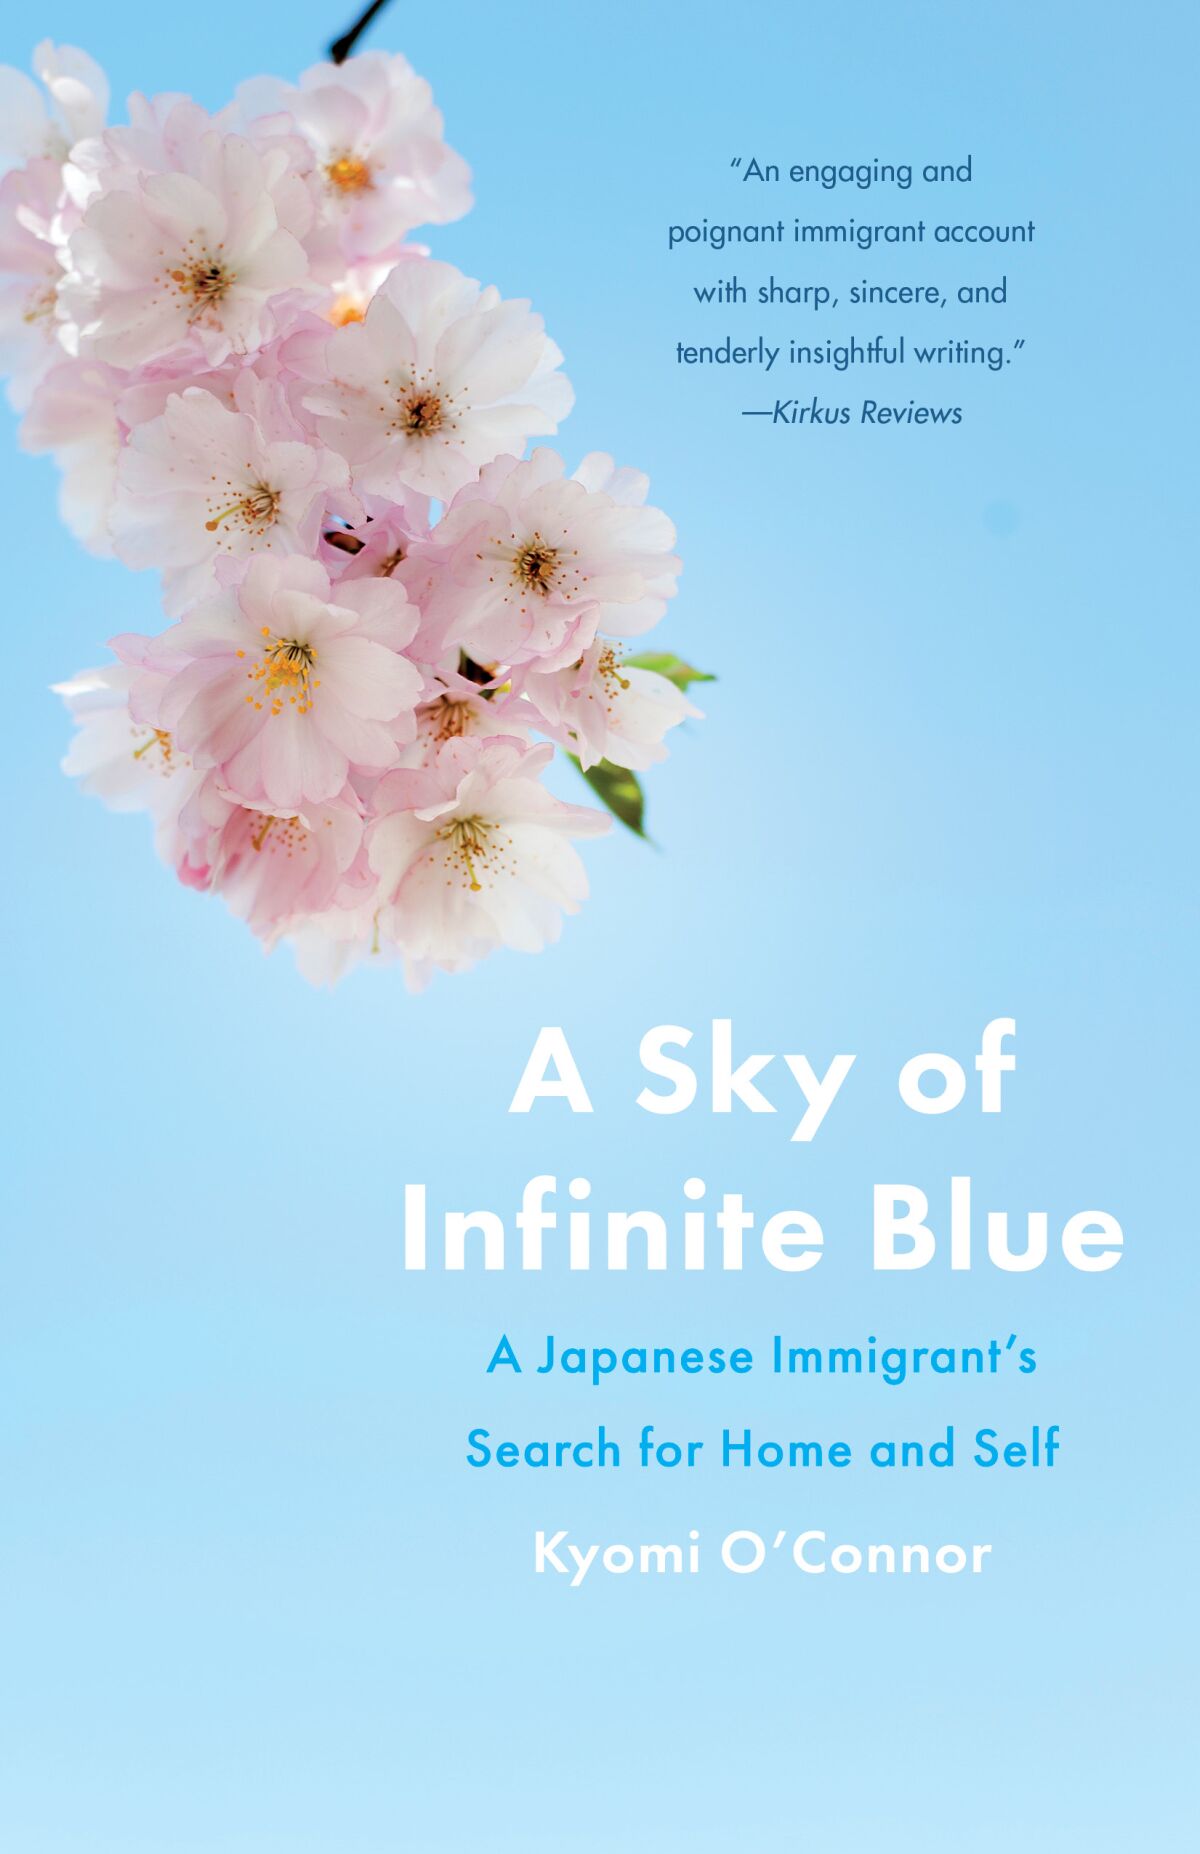 "A Sky of Infinite Blue" will be released on Sept. 6.